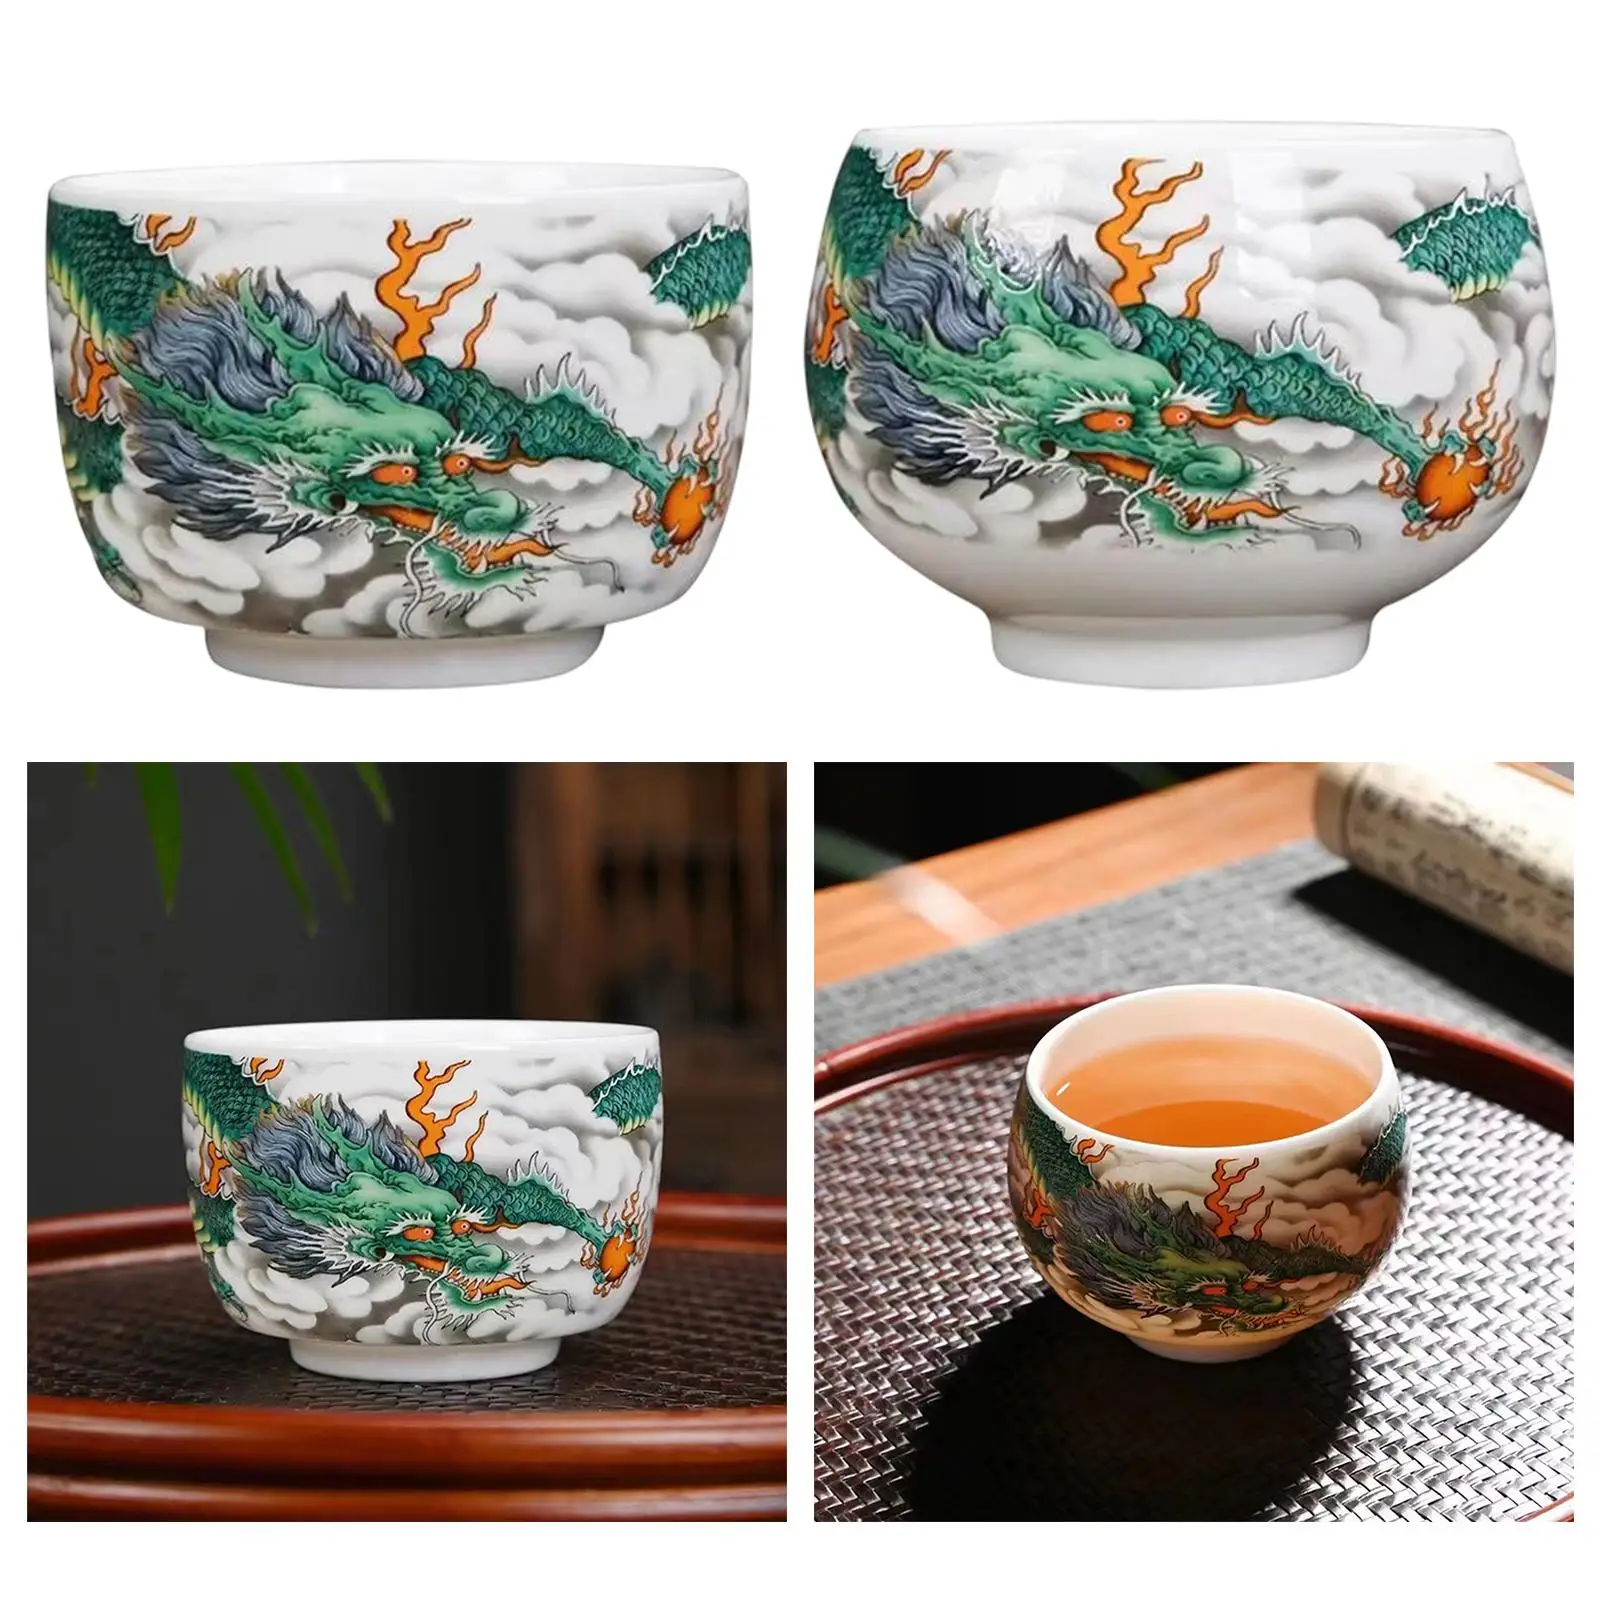 Ceramic Chinese Retro Ceramic Tea Cup Ceramic Coffee Cups Porcelain Chinese Tea Cup Classic Teaware Set for Collectible